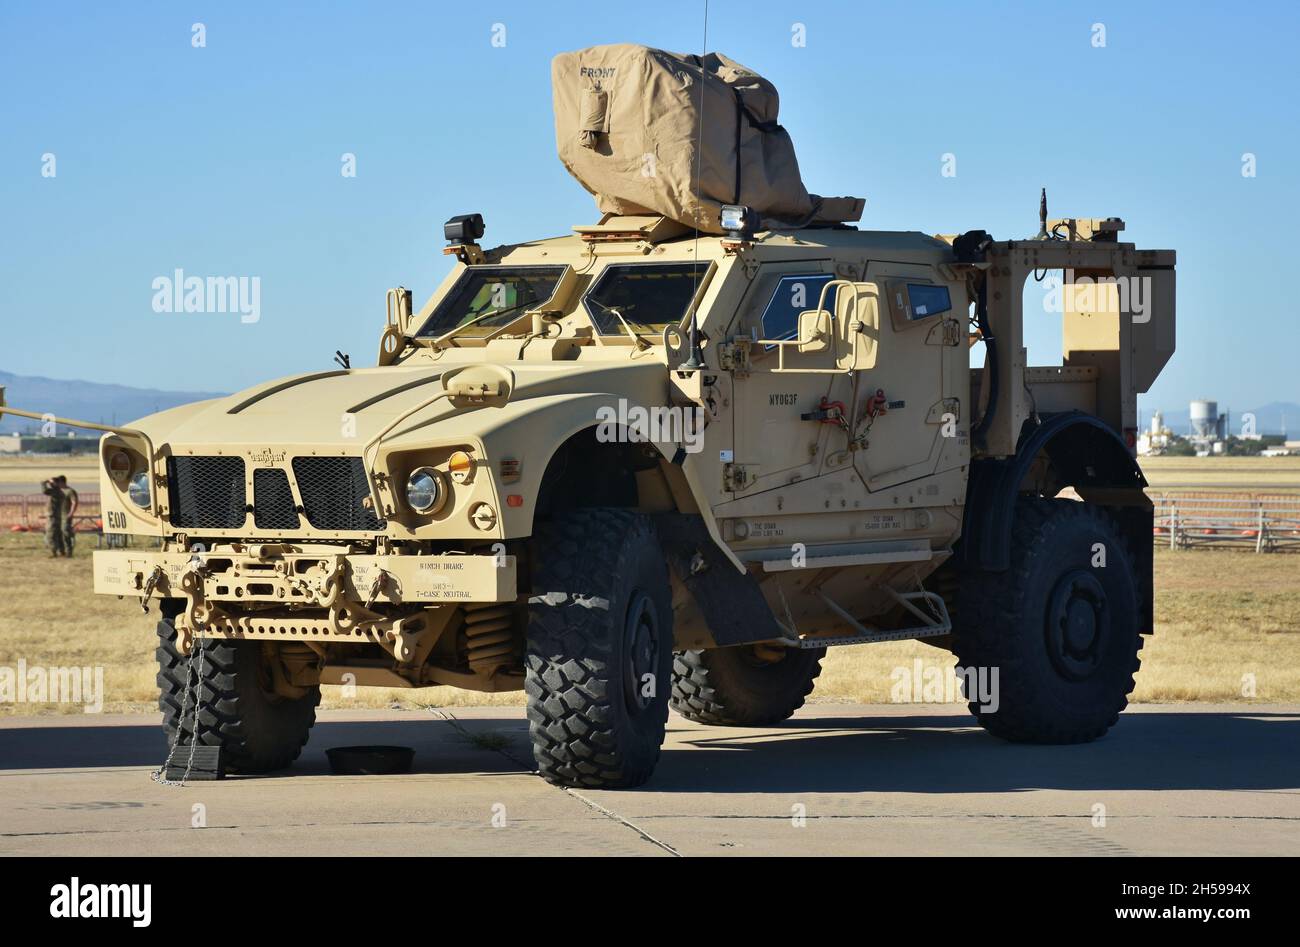 Tucson, USA - November 6, 2021: The Oshkosh Mine-Resistant Ambush Protected (MRAP) truck is used by the U.S. military for troop transportation. Stock Photo